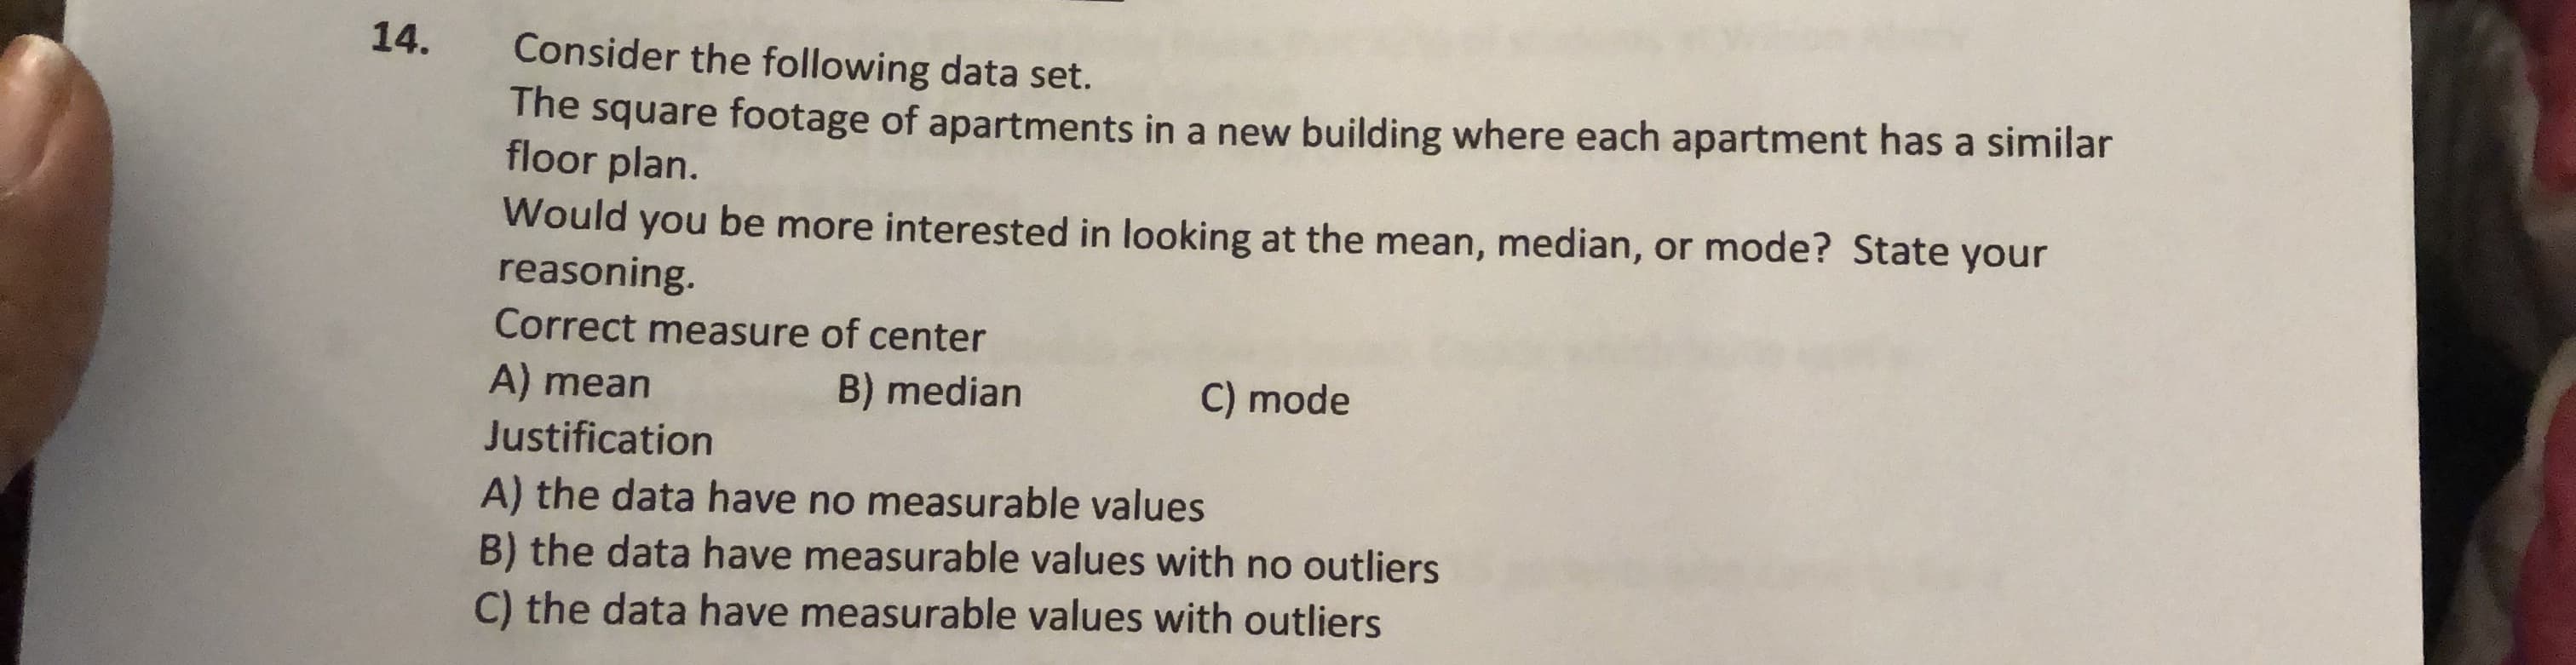 14.
Consider the following data set.
The square footage of apartments in a new building where each apartment has a similar
floor plan.
Would you be more interested in looking at the mean, median, or mode? State your
reasoning.
Correct measure of center
B) median
C) mode
A) mean
Justification
A) the data have no measurable values
B) the data have measurable values with no outliers
C) the data have measurable values with outliers
